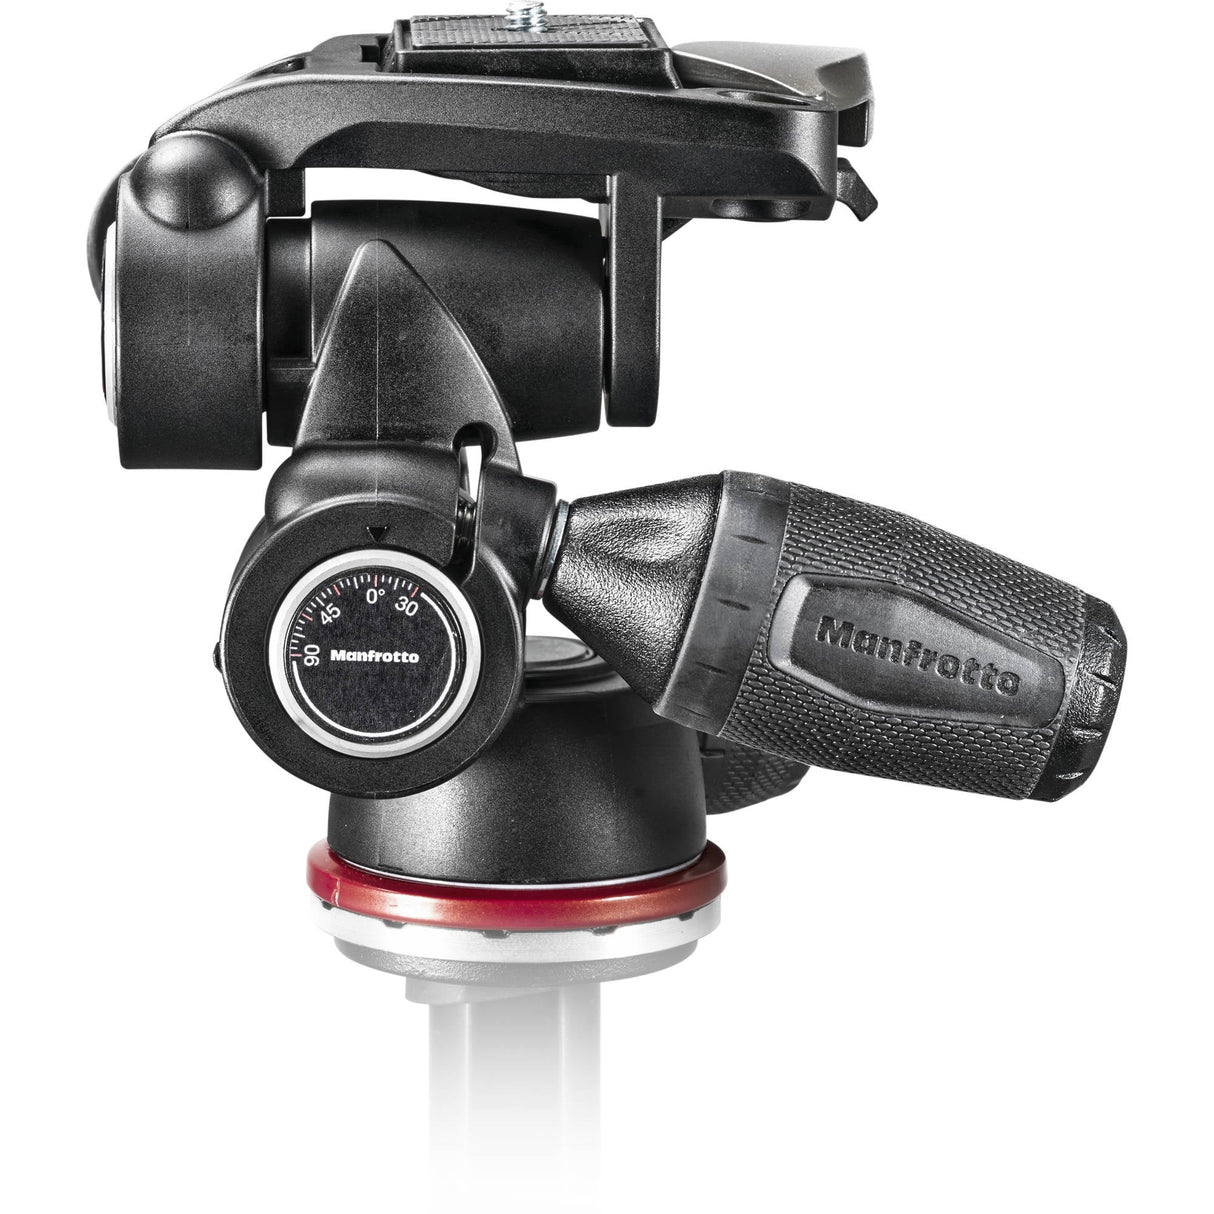 Manfrotto MH804 3-Way, Pan-and-Tilt Head with 200LT-PL Quick Release Plate